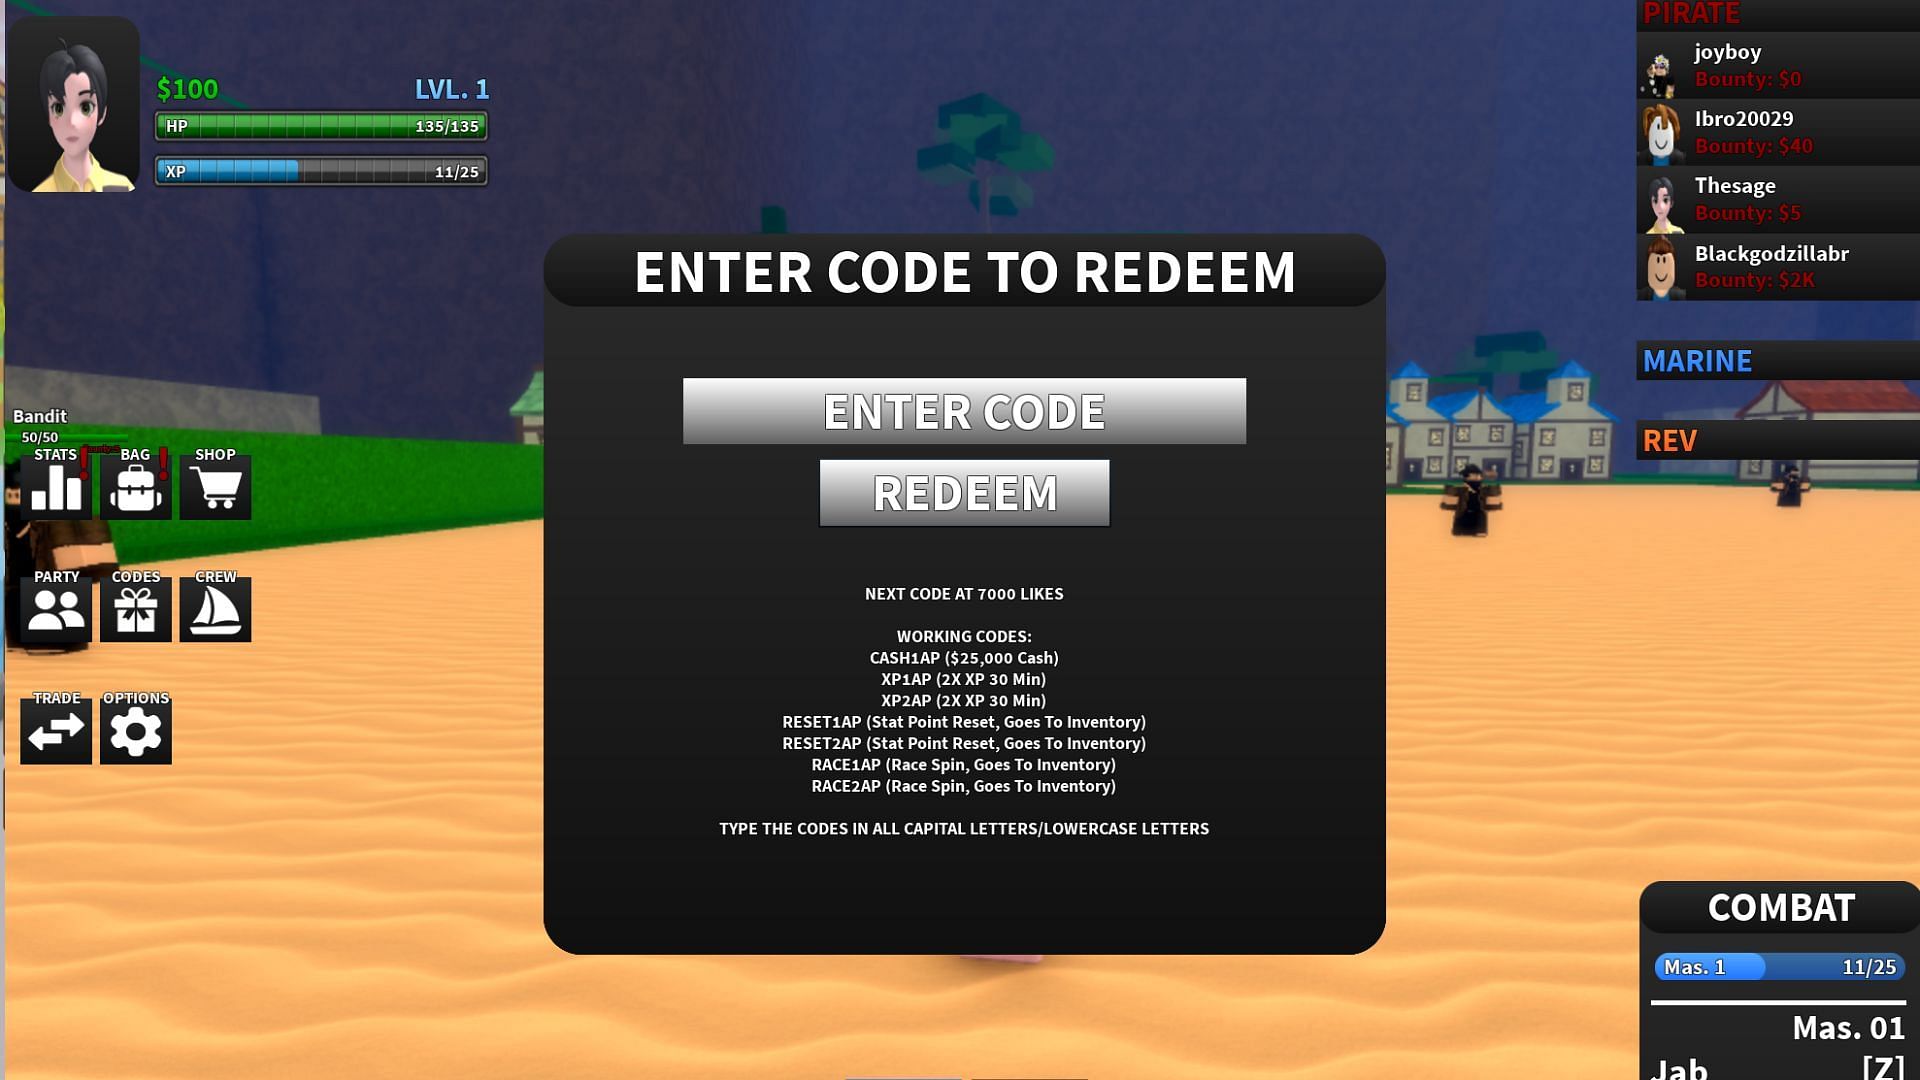 Redeem your code here (Image via Roblox)